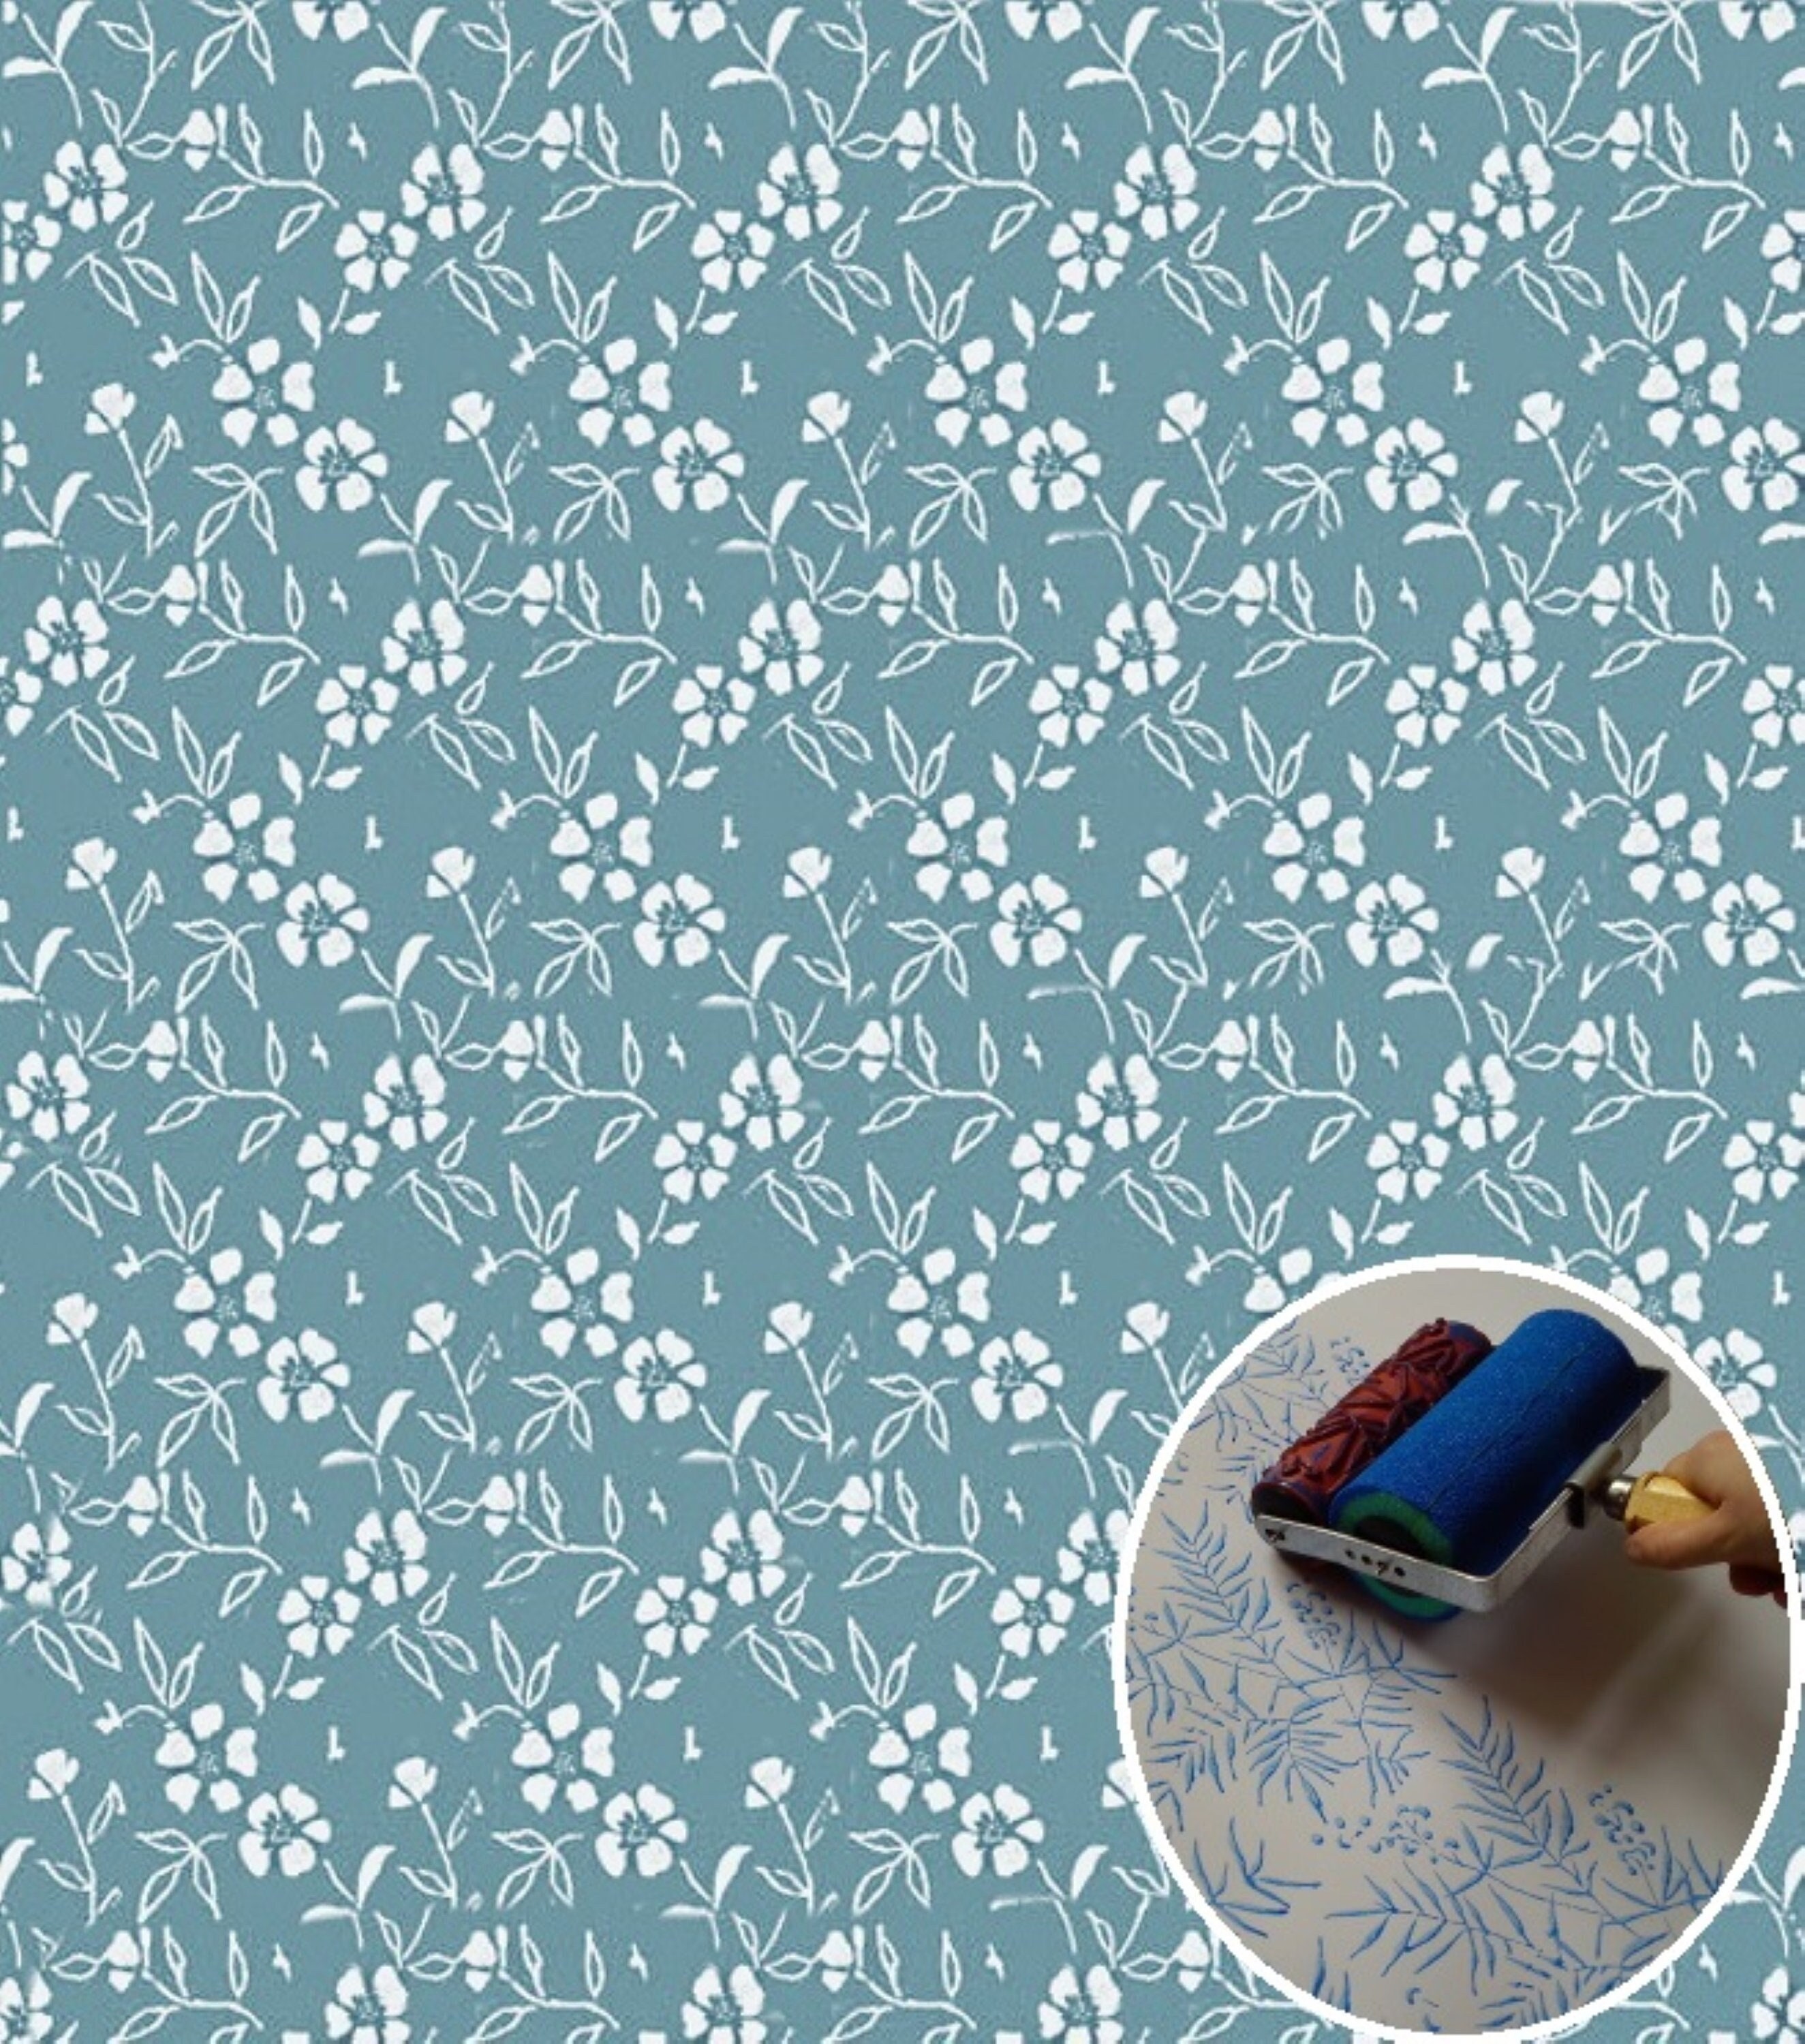 Drywall Texture Pattern Roller for Decorative Paint Texturing (Pin-Wheel  Pattern)